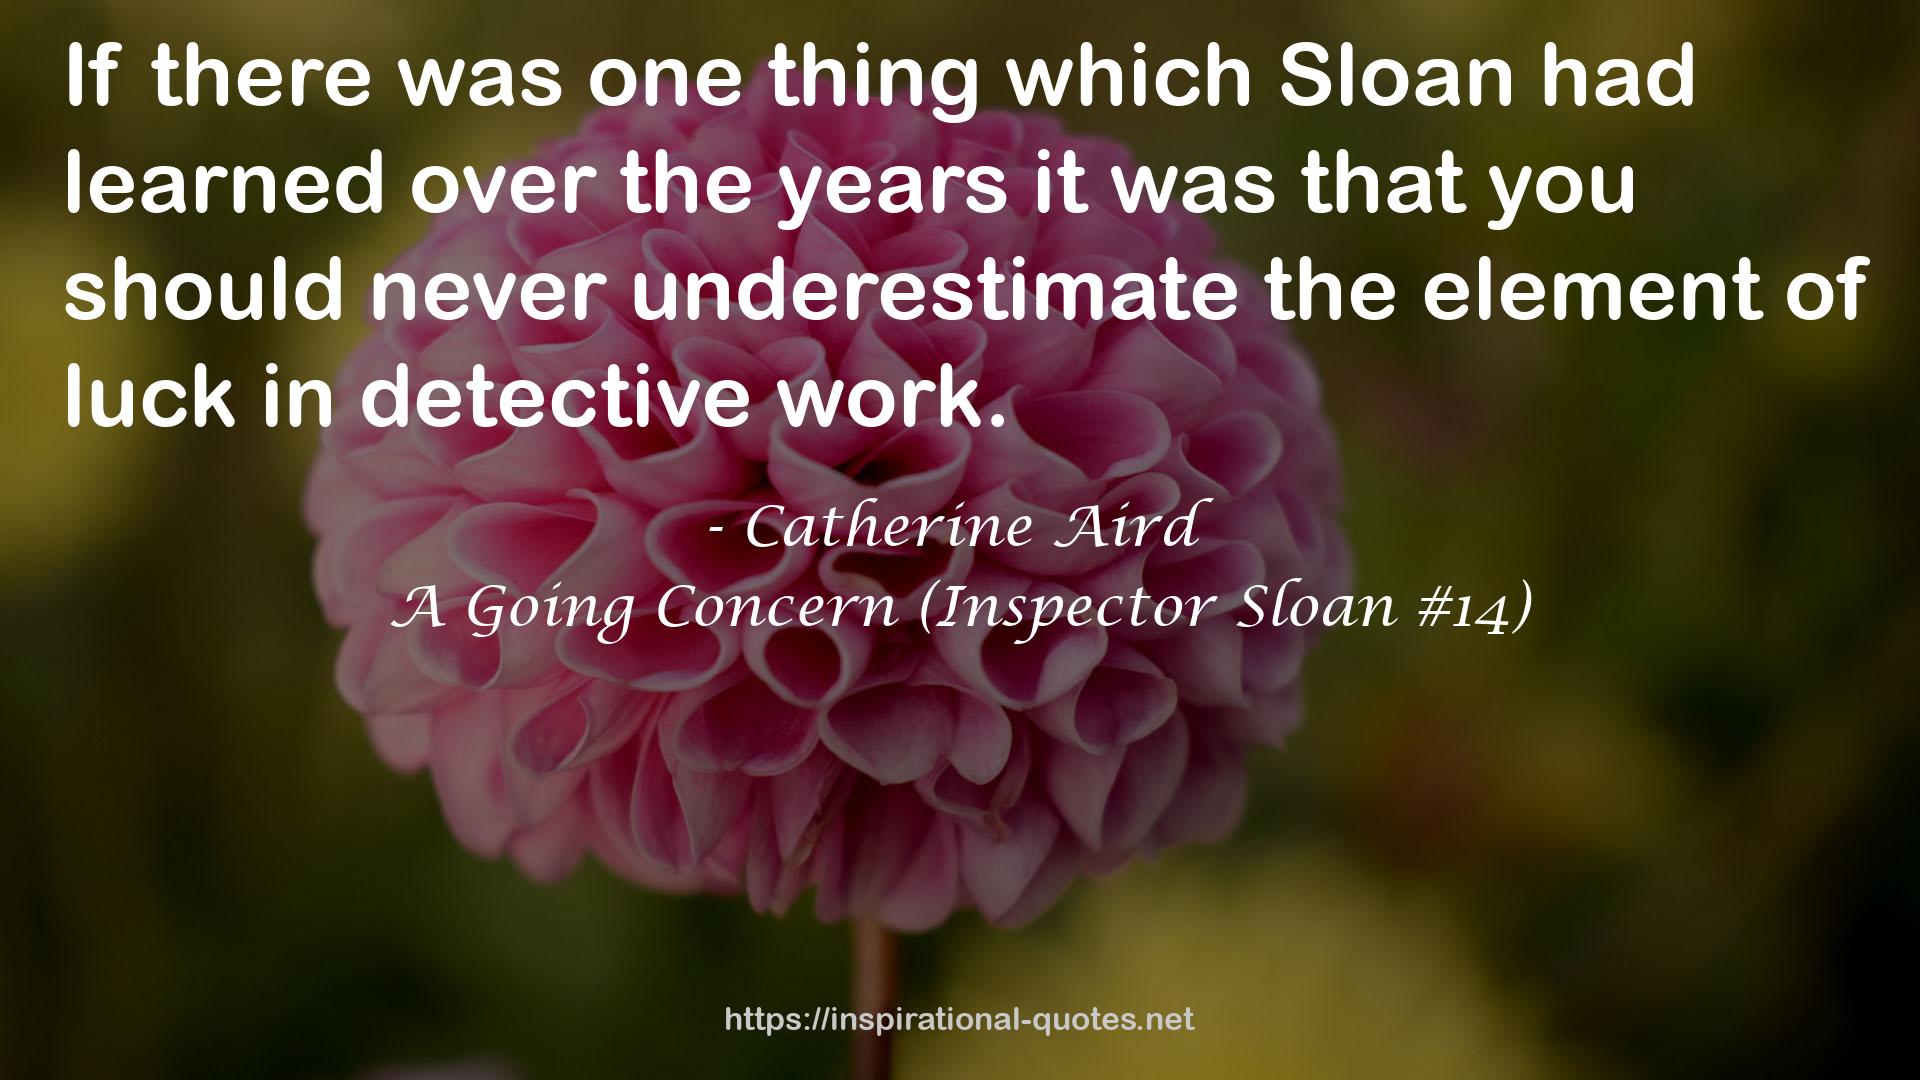 A Going Concern (Inspector Sloan #14) QUOTES